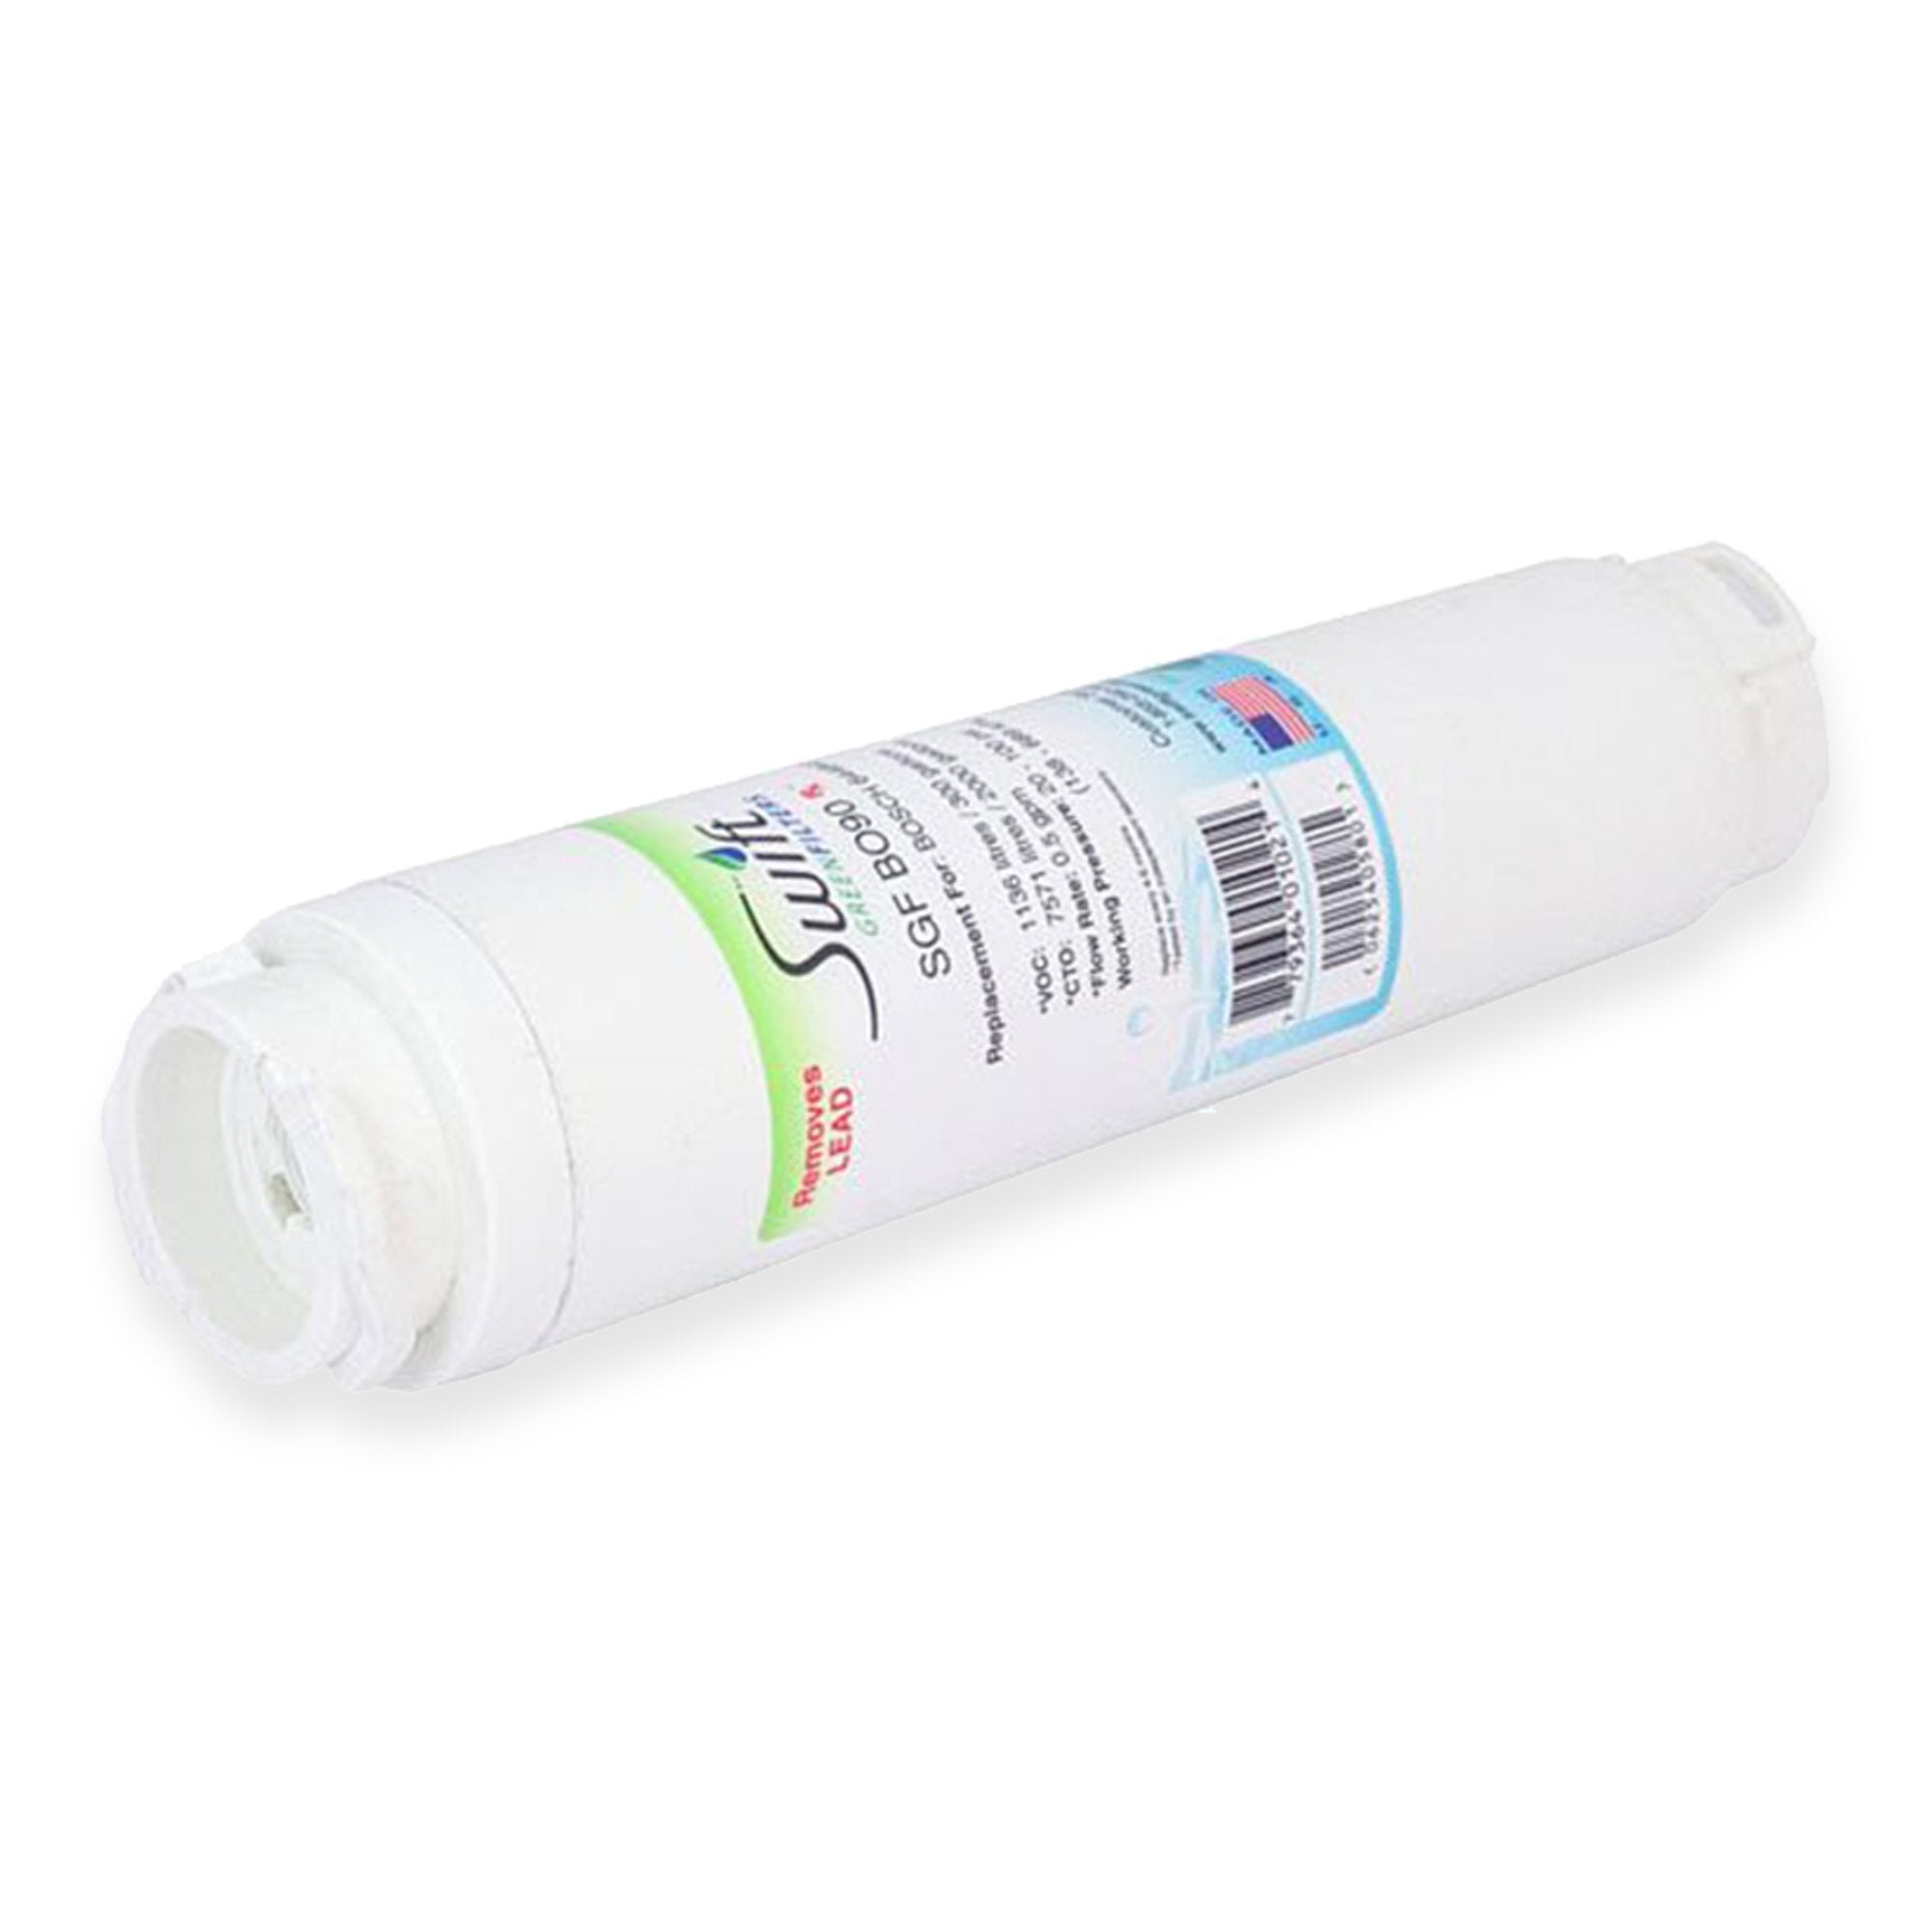 BORPLFTR10 Compatible Pharmaceutical Refrigerator Water Filter